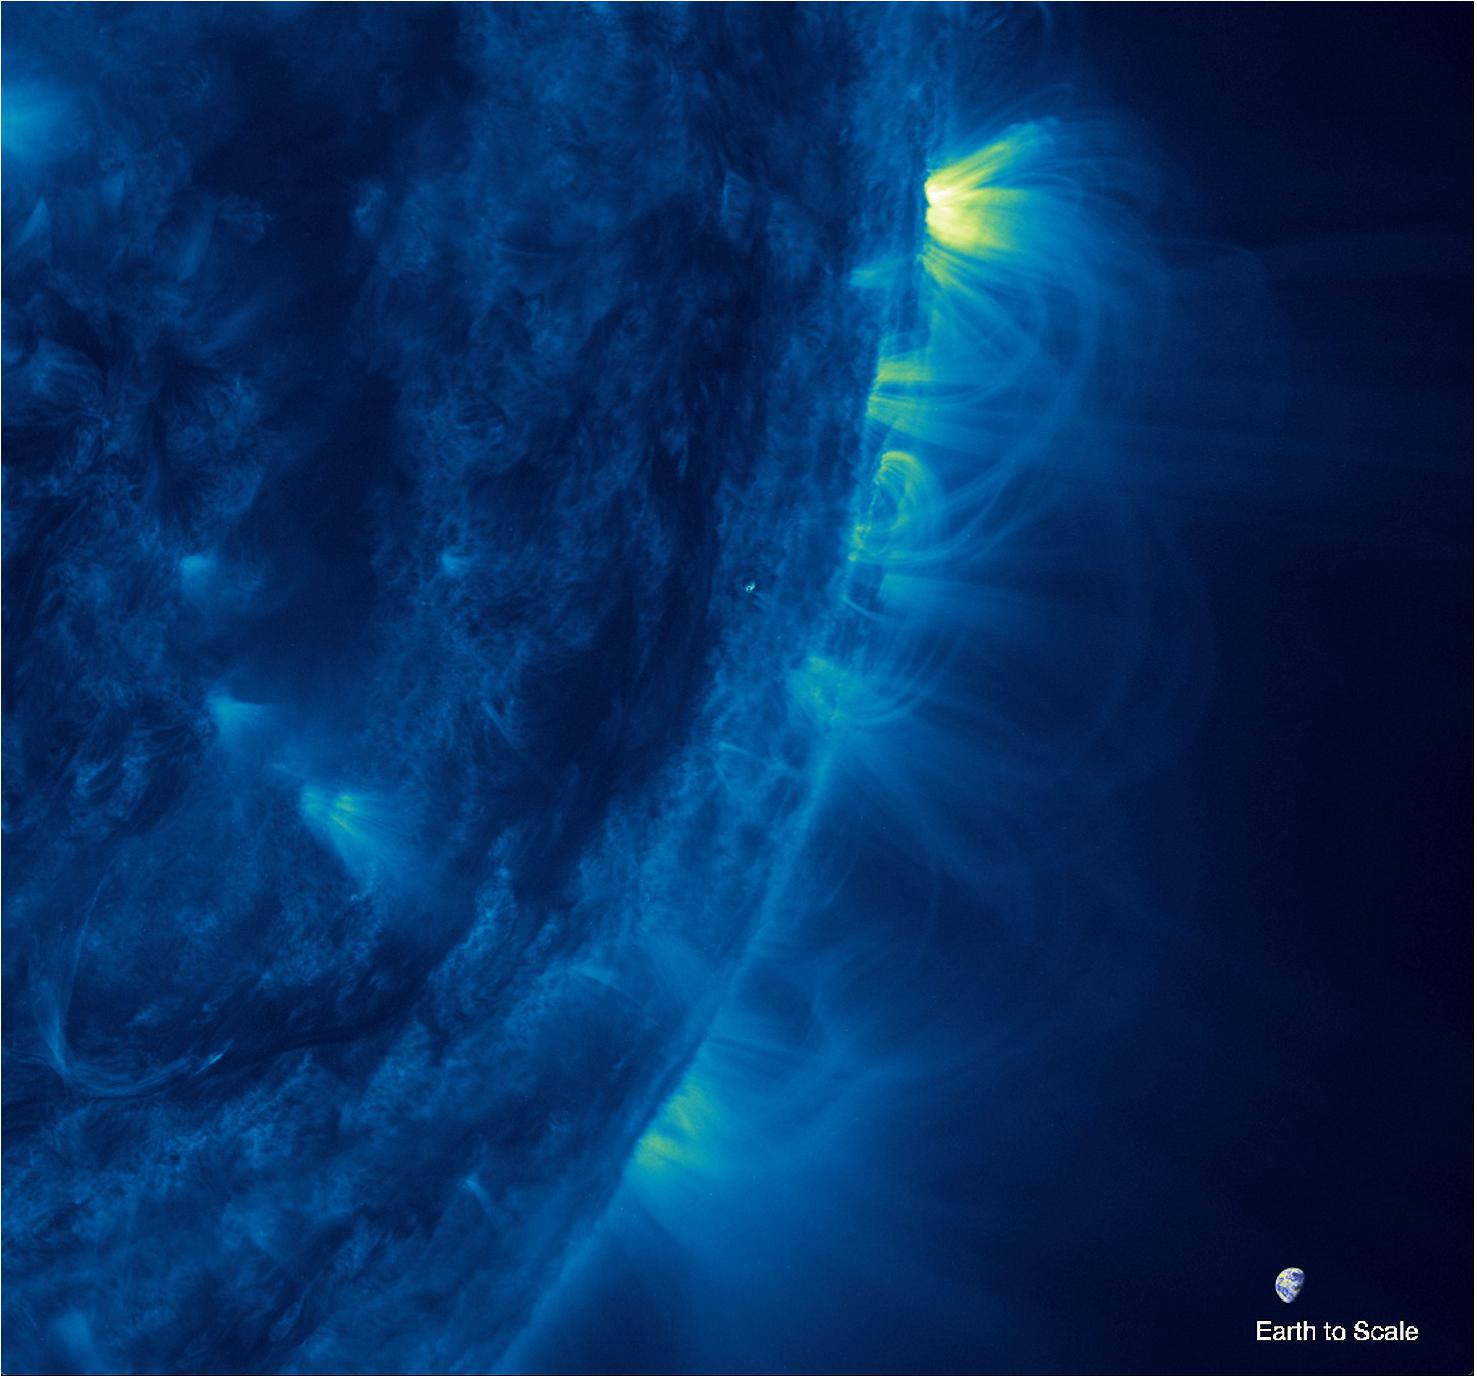 Figure 10: This ultraviolet image of coronal loops on the Sun was taken using the 335 Ångström channel of the Atmospheric Imaging Assembly telescope on NASA's Solar Dynamics Observatory. Earth is shown to scale. The image shows solar plasma at temperatures around 4.5 million degrees Fahrenheit (2.5 million degrees Celsius) colorized in blue. In this image, loops extend far from the solar surface without expanding much with height, which is counter to the expected physics according to the "garden hose" model of coronal loops (image credits: NASA/SDO)